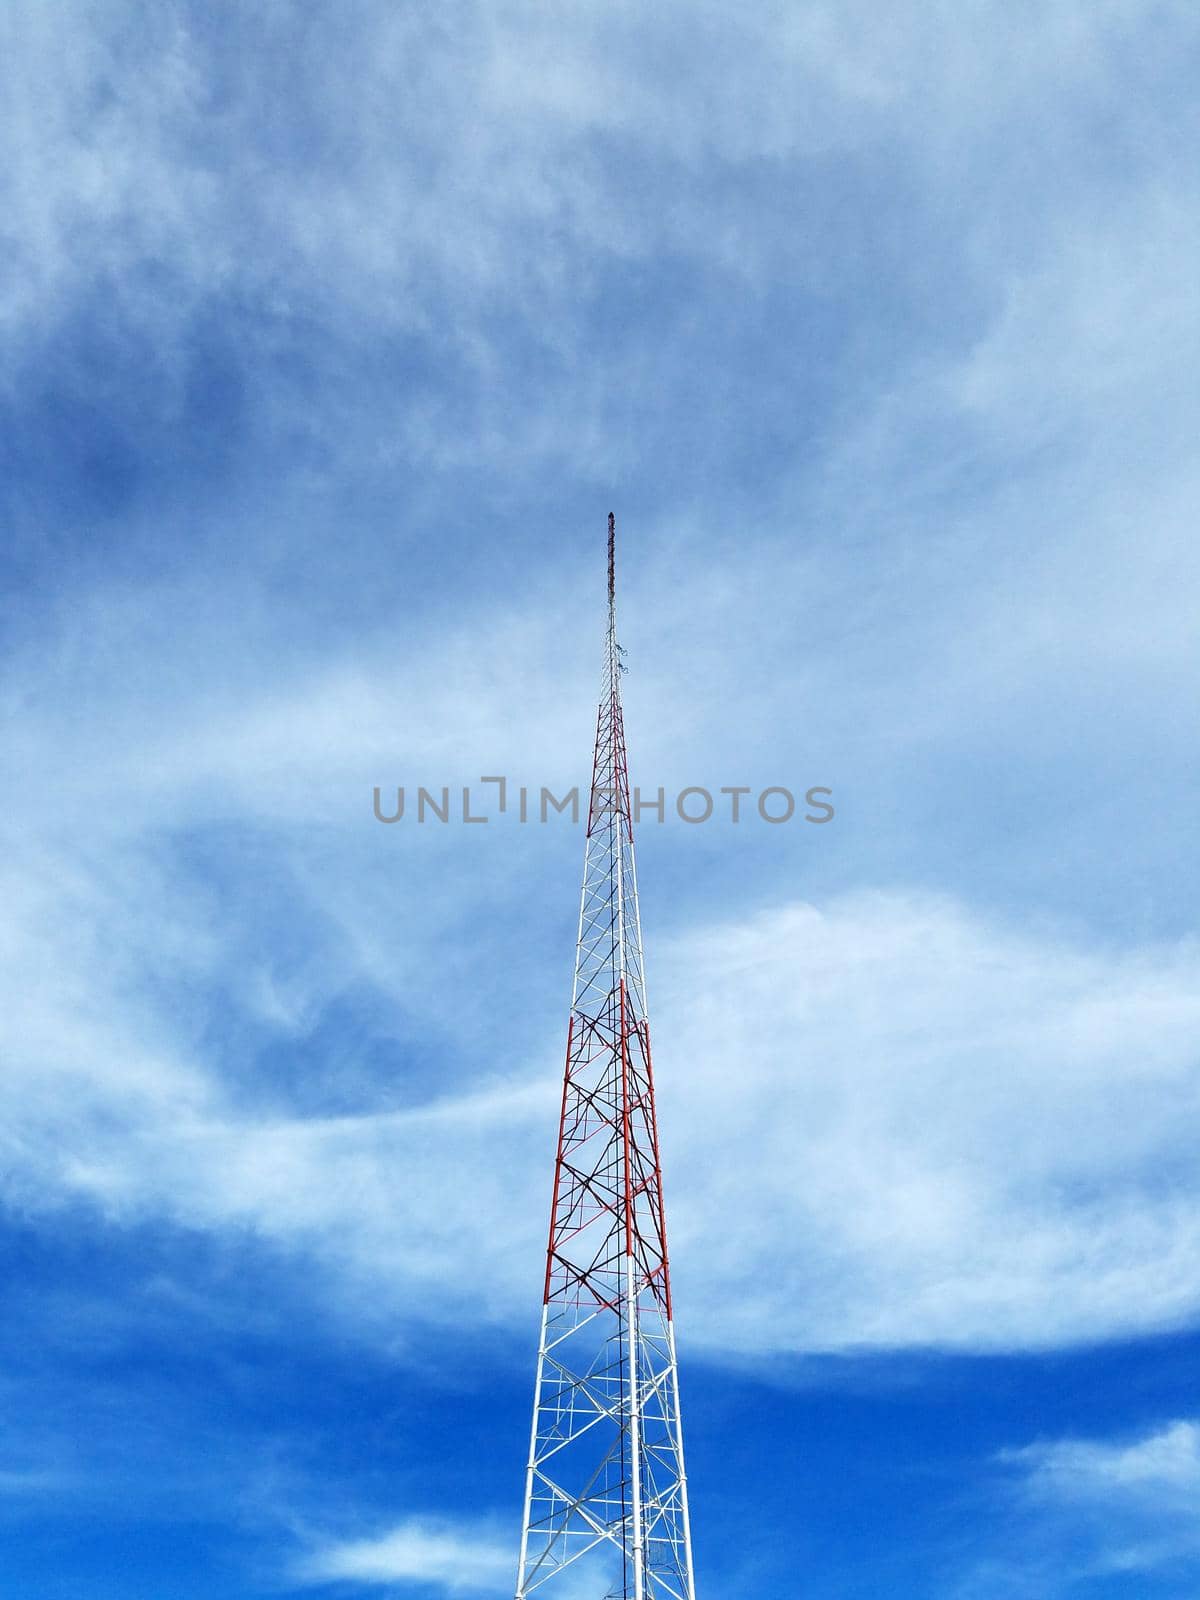 Red and White Communication tower against a cloudy sky by EricGBVD